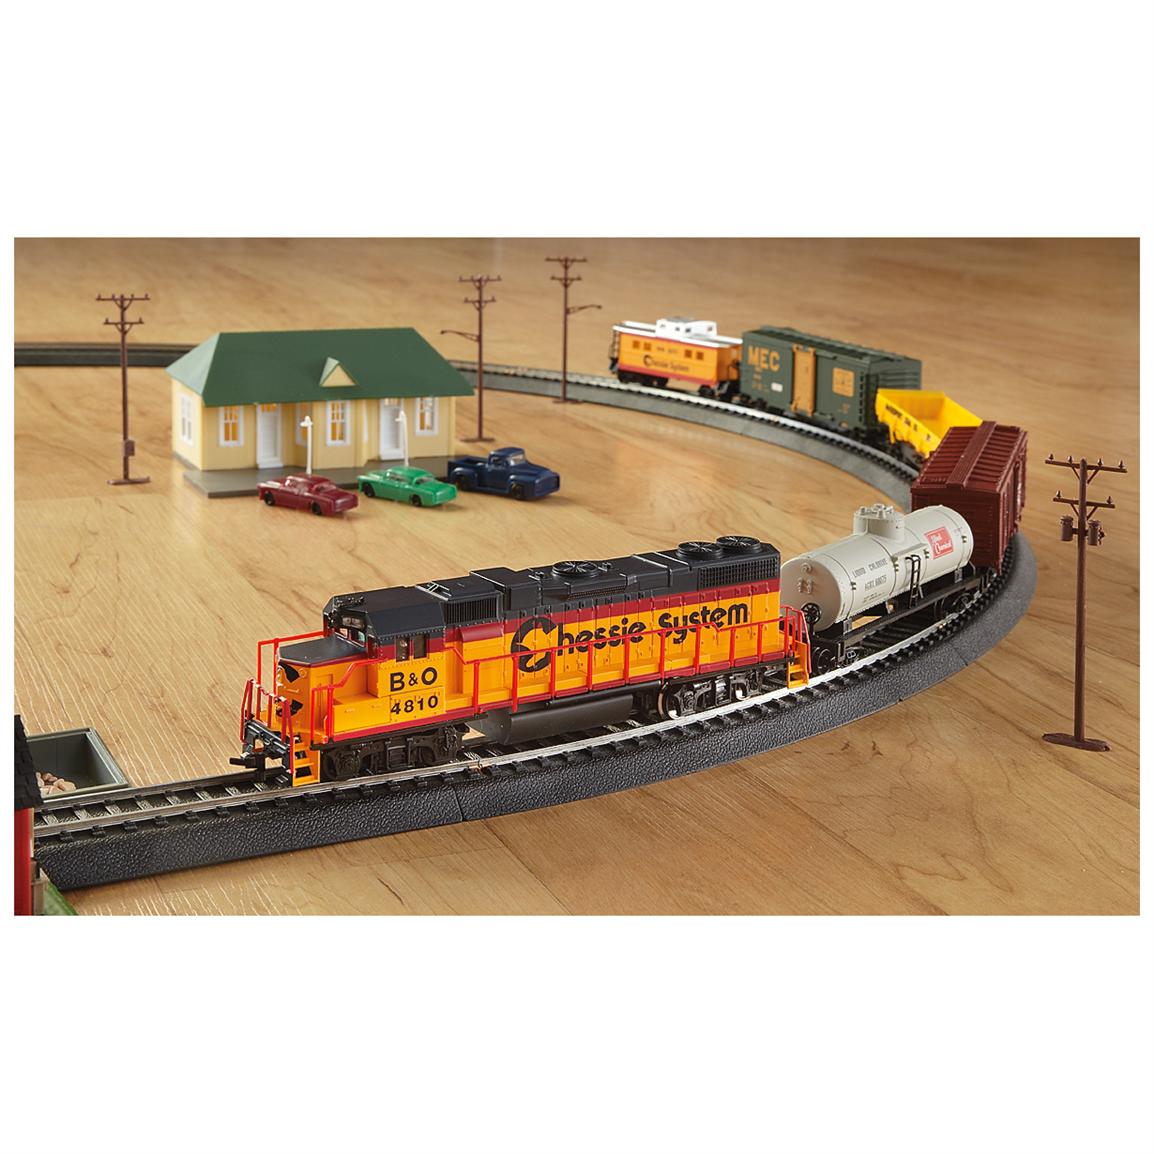 Walthers® Rail Blaster HO-scale Electric Train Set - 301211, Remote 